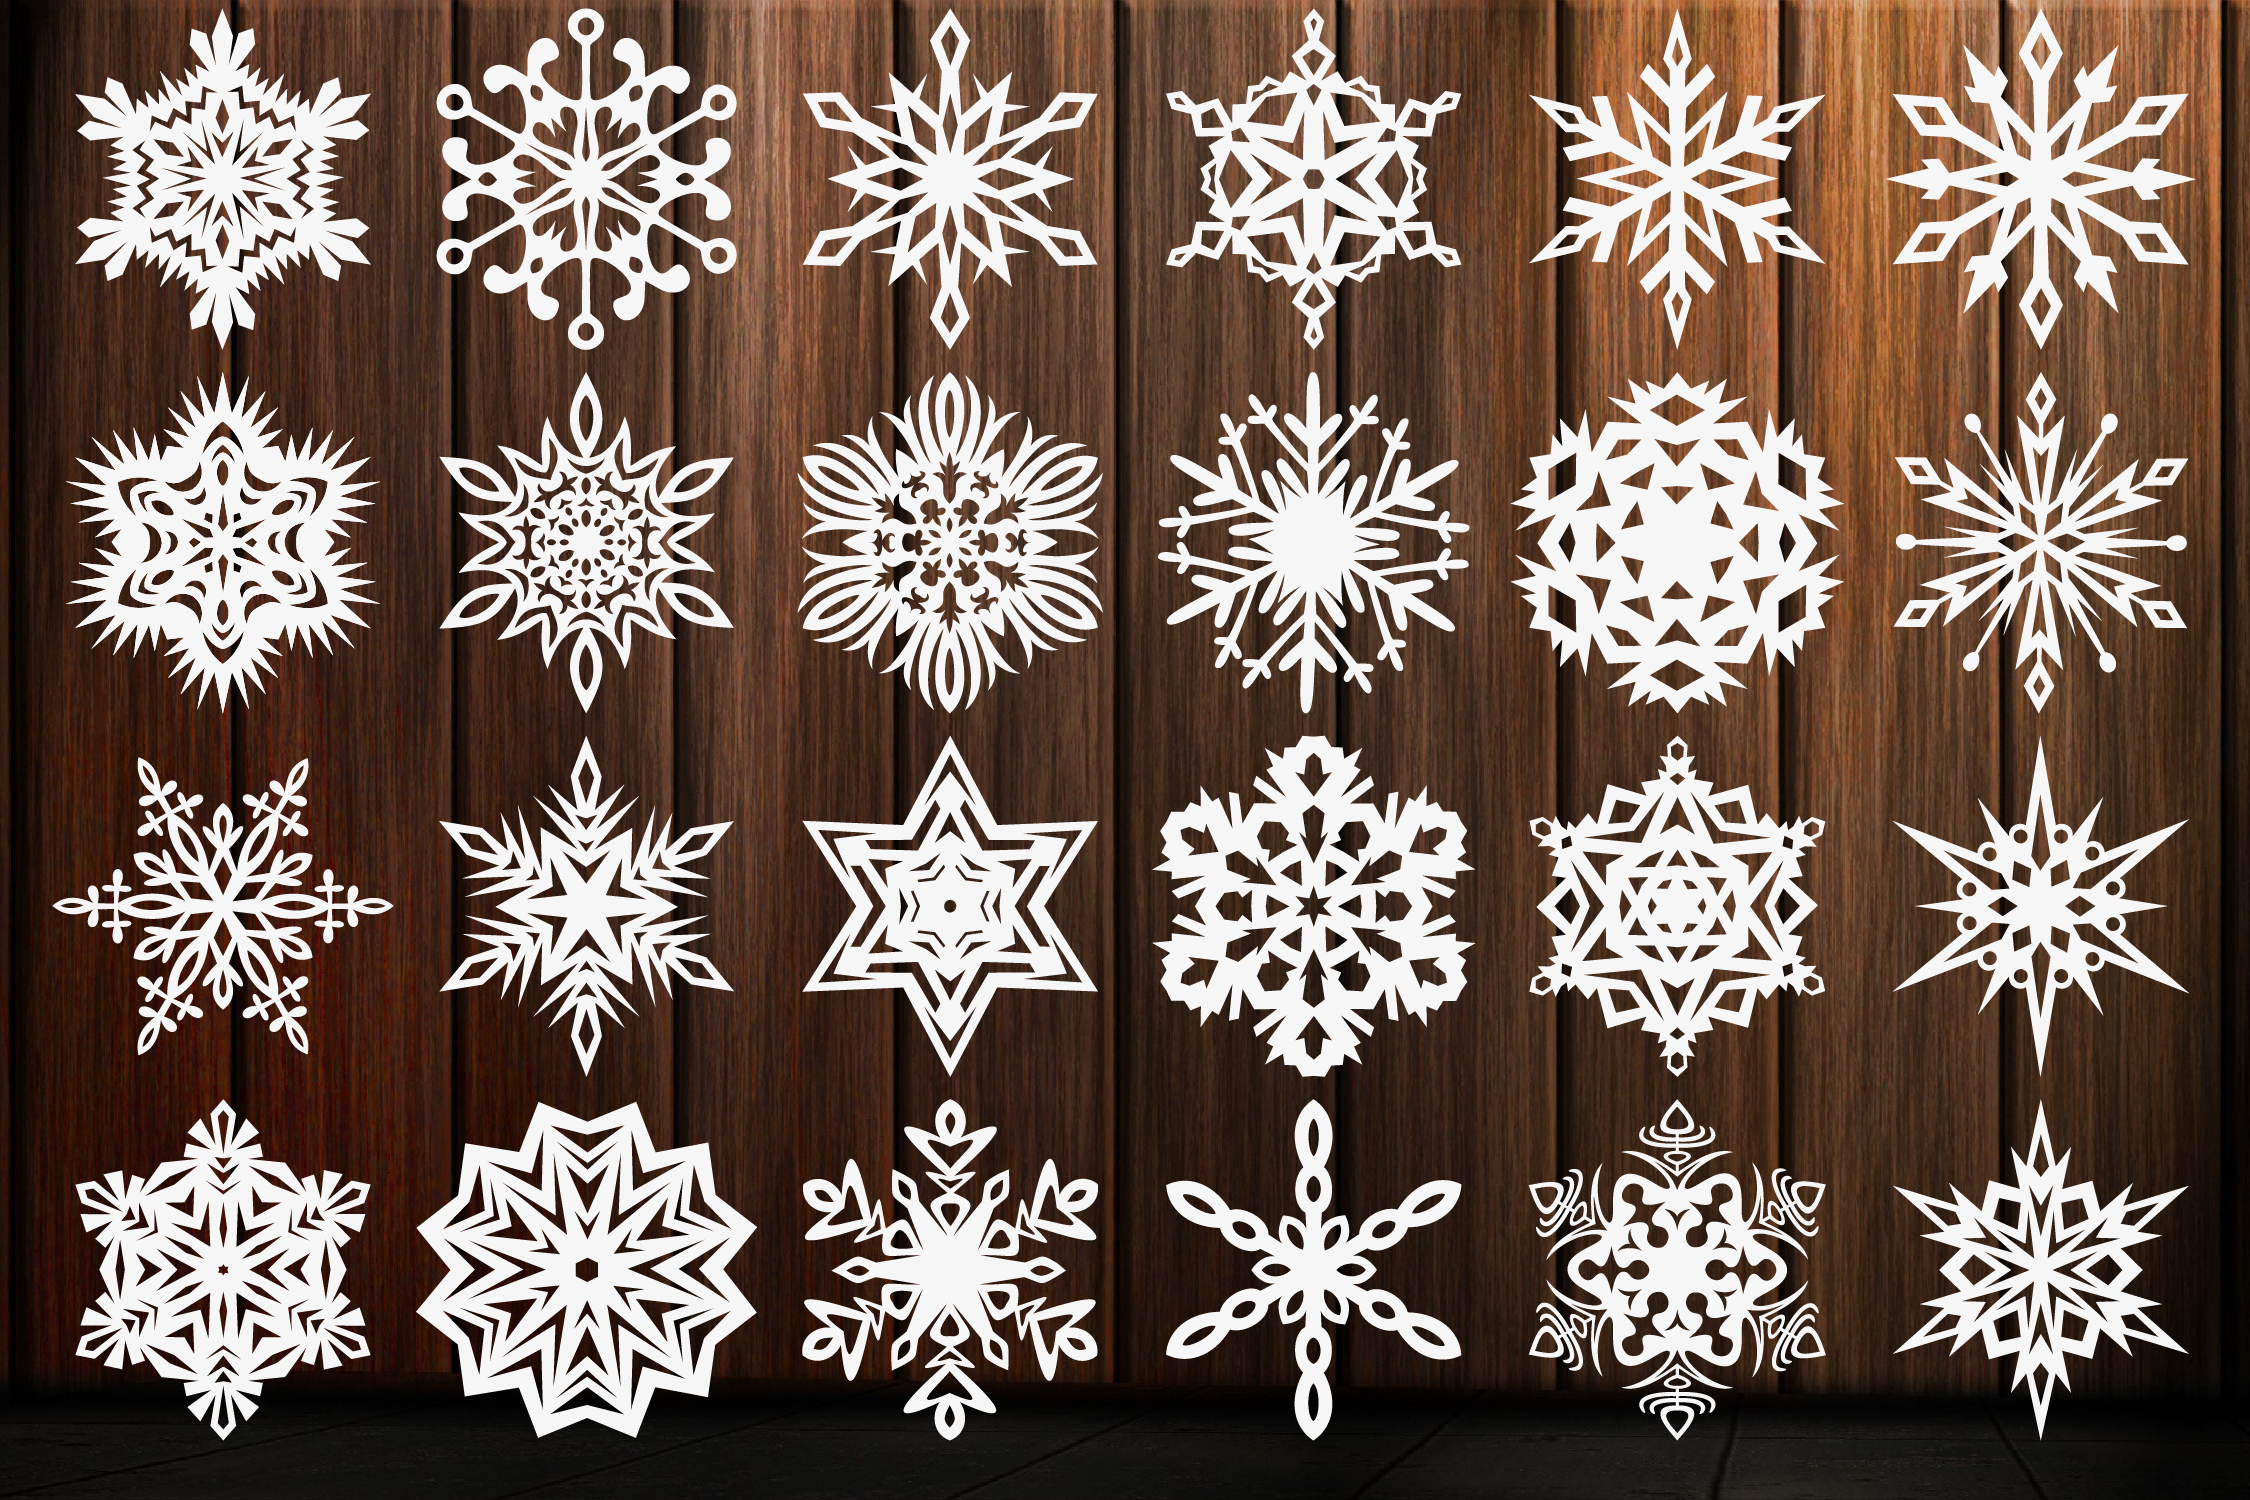 Download Snowflake SVG, Christmas Snowflakes SVG By ...